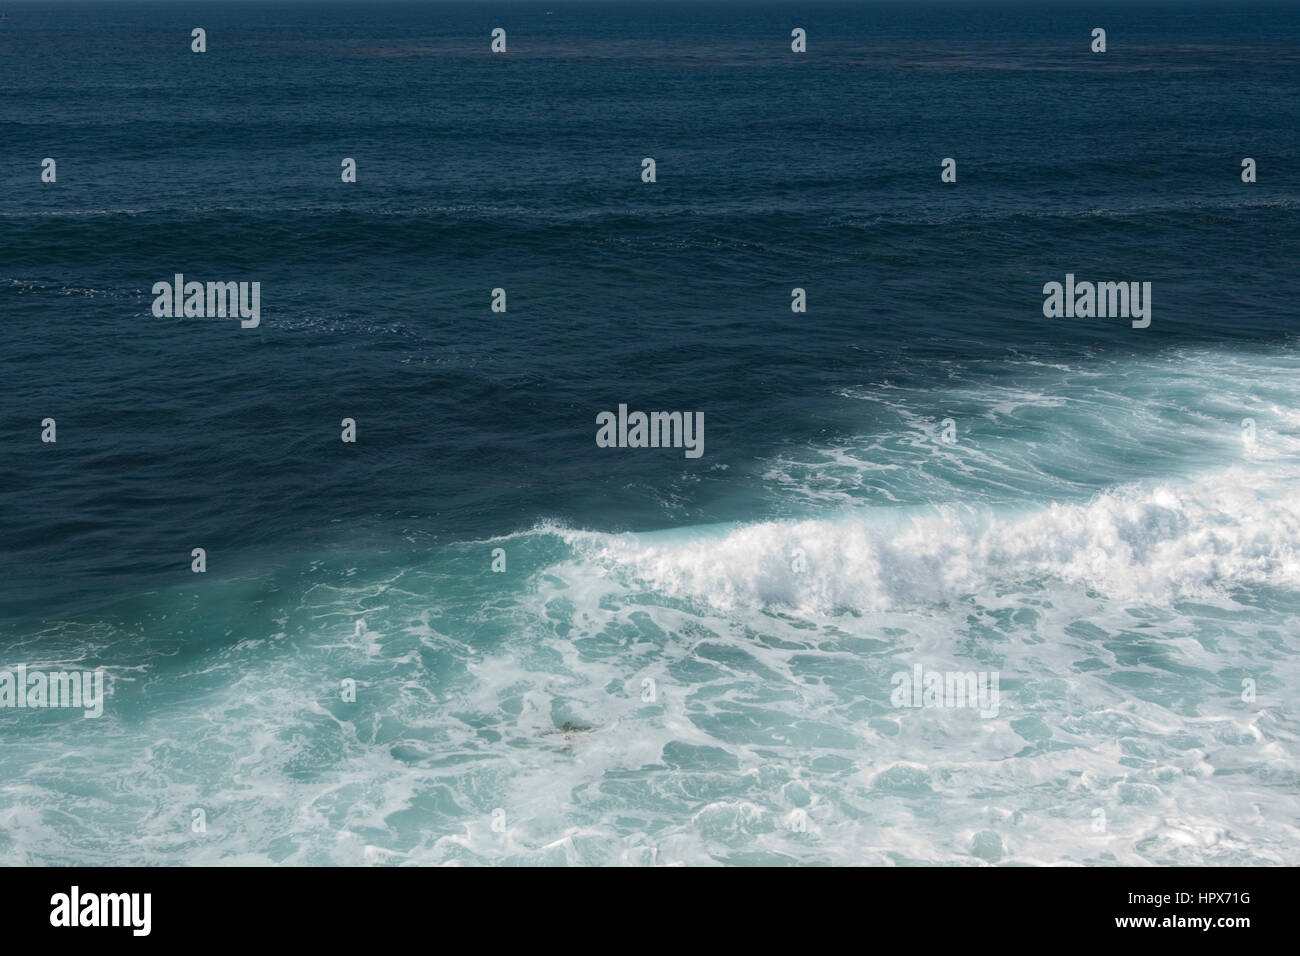 Waves from the Pacific Ocean crash upon the shores of La Jolla Cove in San Diego, California. Stock Photo